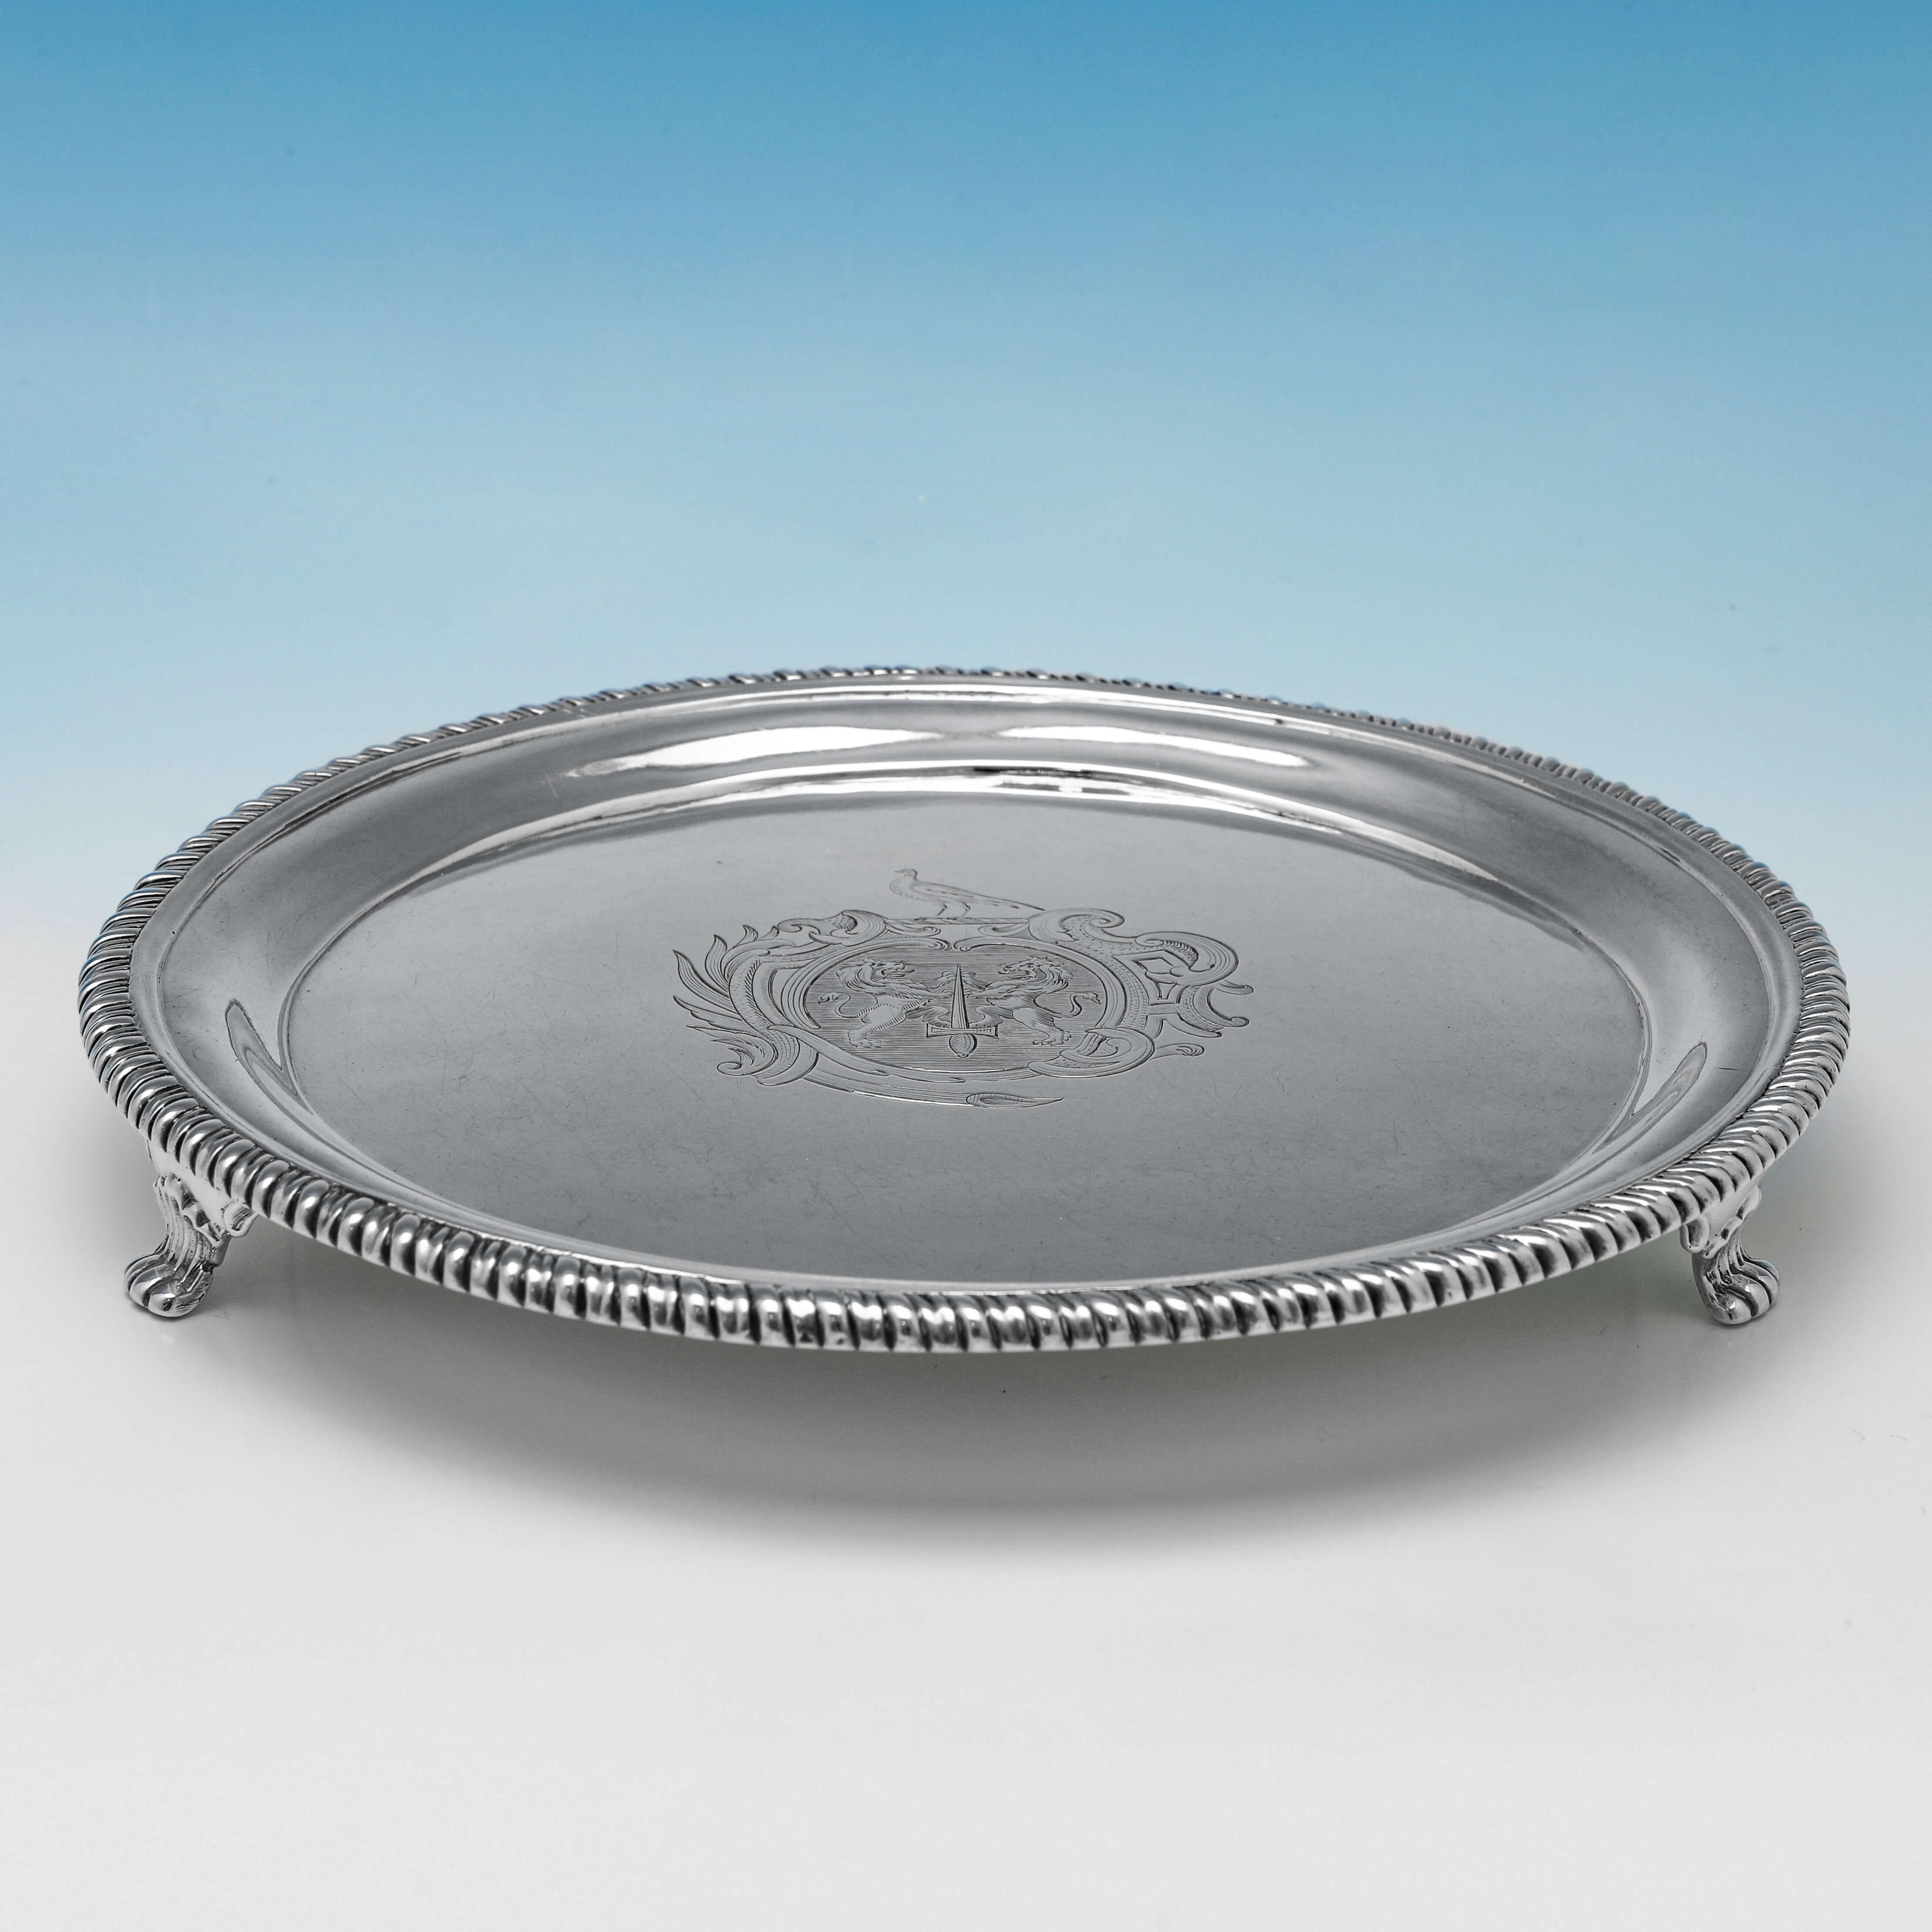 Hallmarked in London in 1759 by John Cafe, this George II, Antique Sterling Silver Salver, features a gadroon border and lion paw feet. The salver measures 1